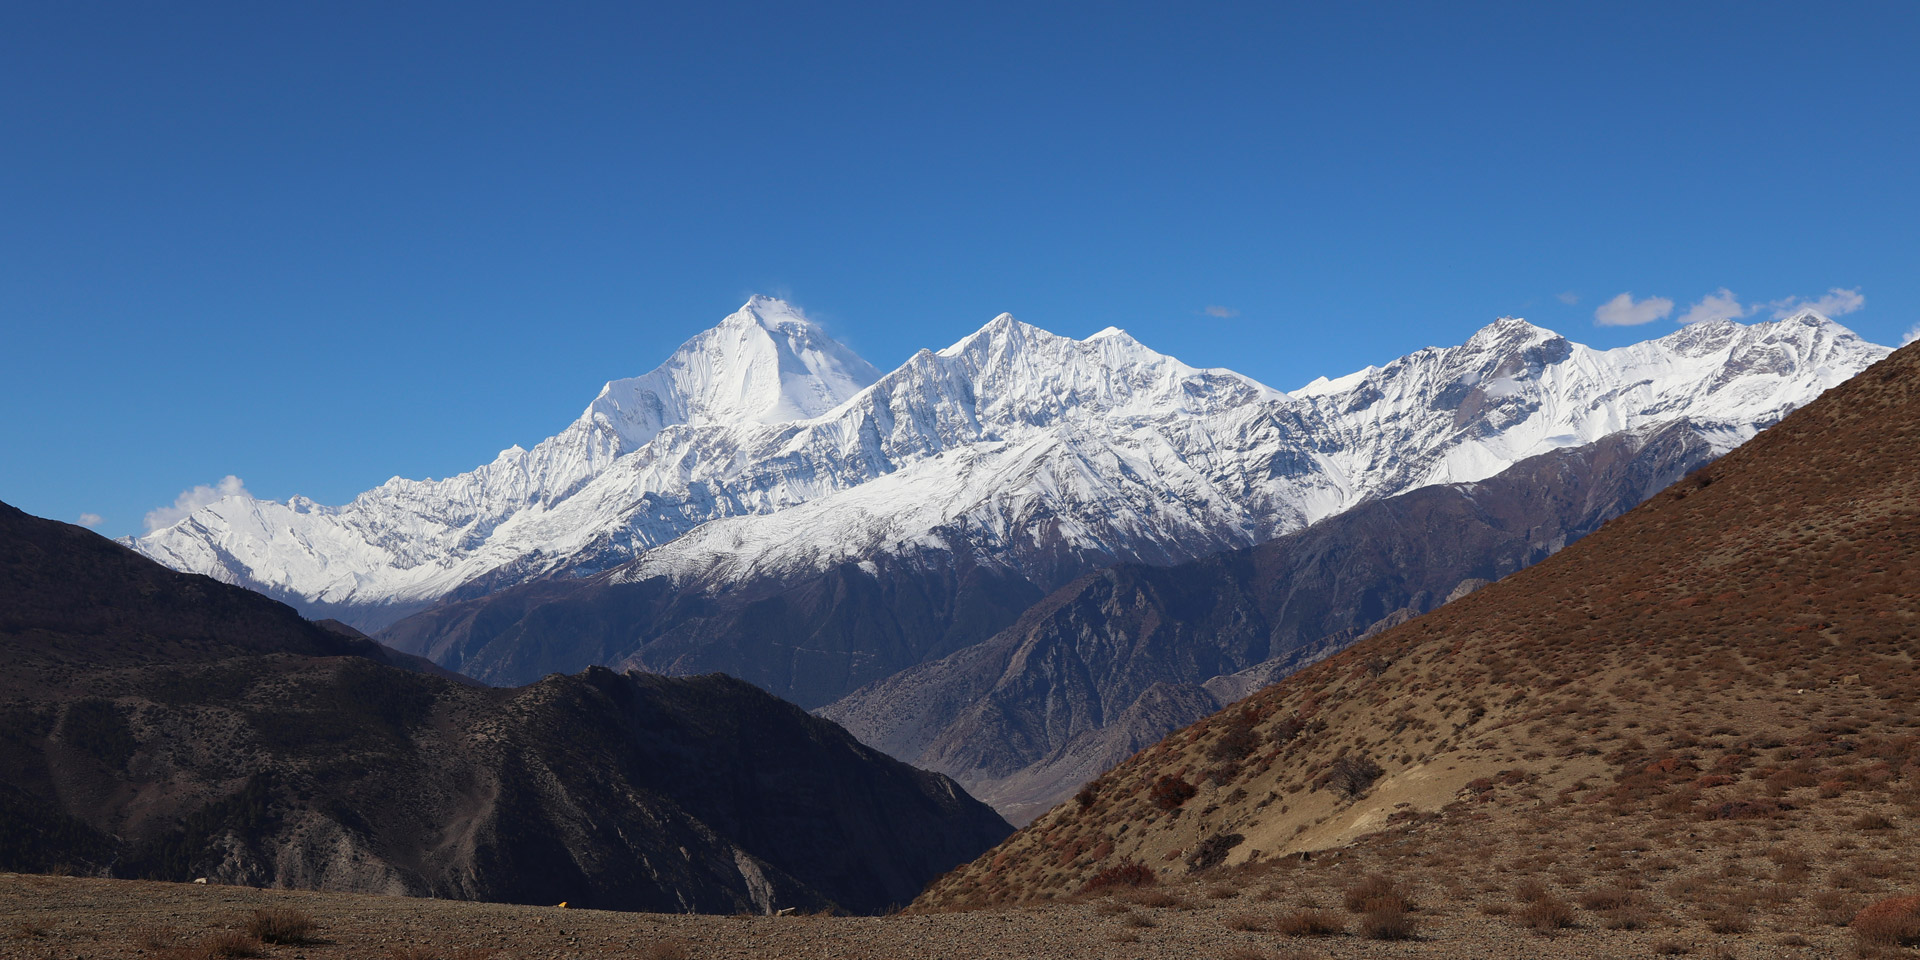 View of Dhaulagiri and Tukuche peaks from the trail to Lupra in the Mustang region of Nepal